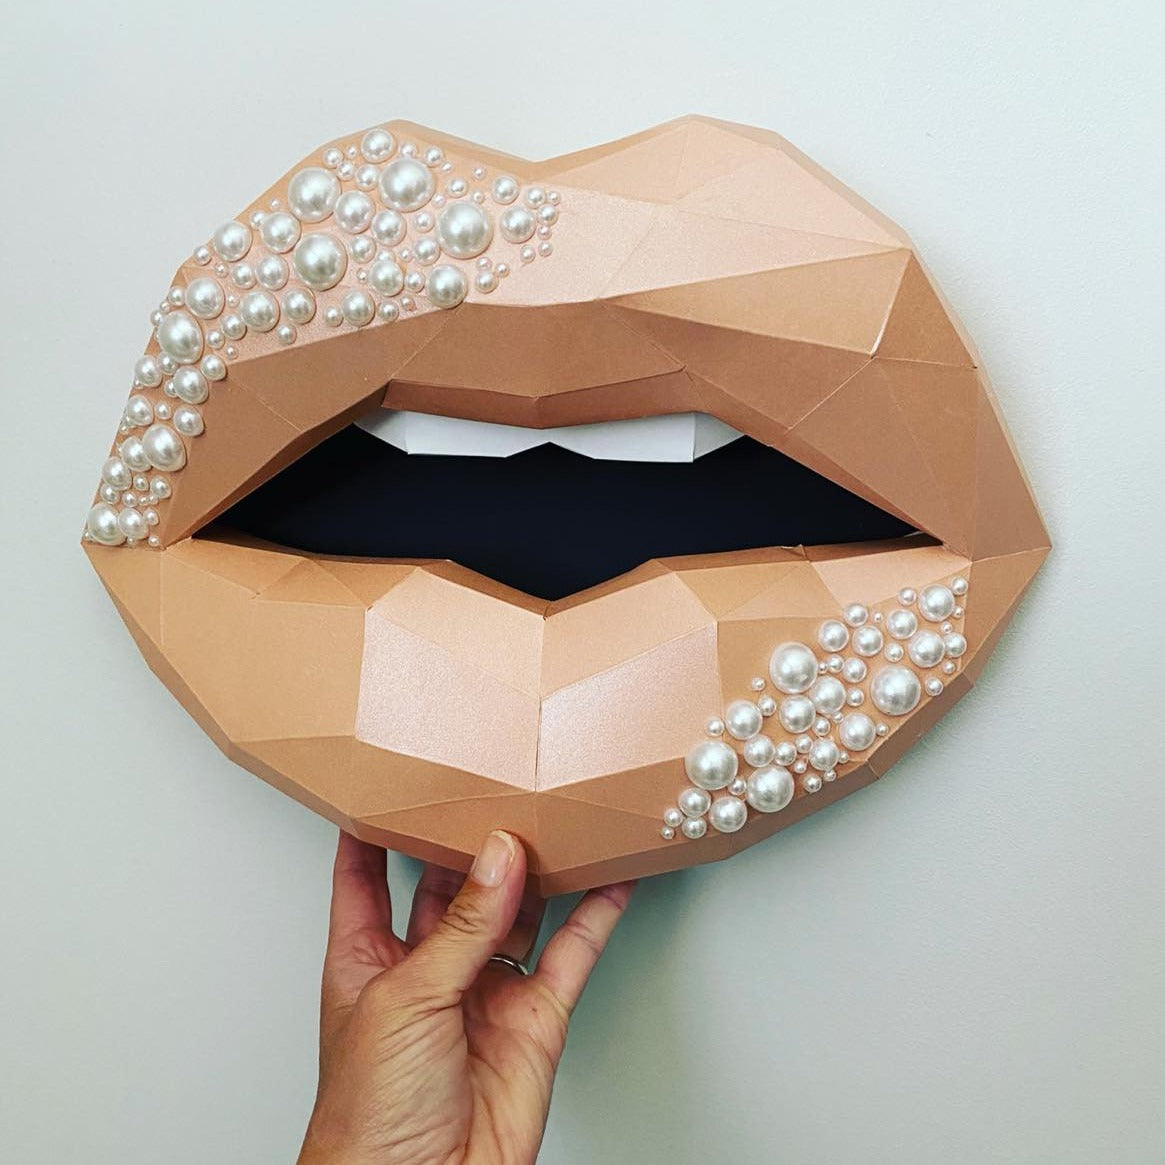 Paper Lips Nude Shimmery  Wall Art for Home Office or Salon | Pearl Bling Lippies for Classy Fashion Lover | Gift for Makeup Artist - Pucker Up Lips and Accessories